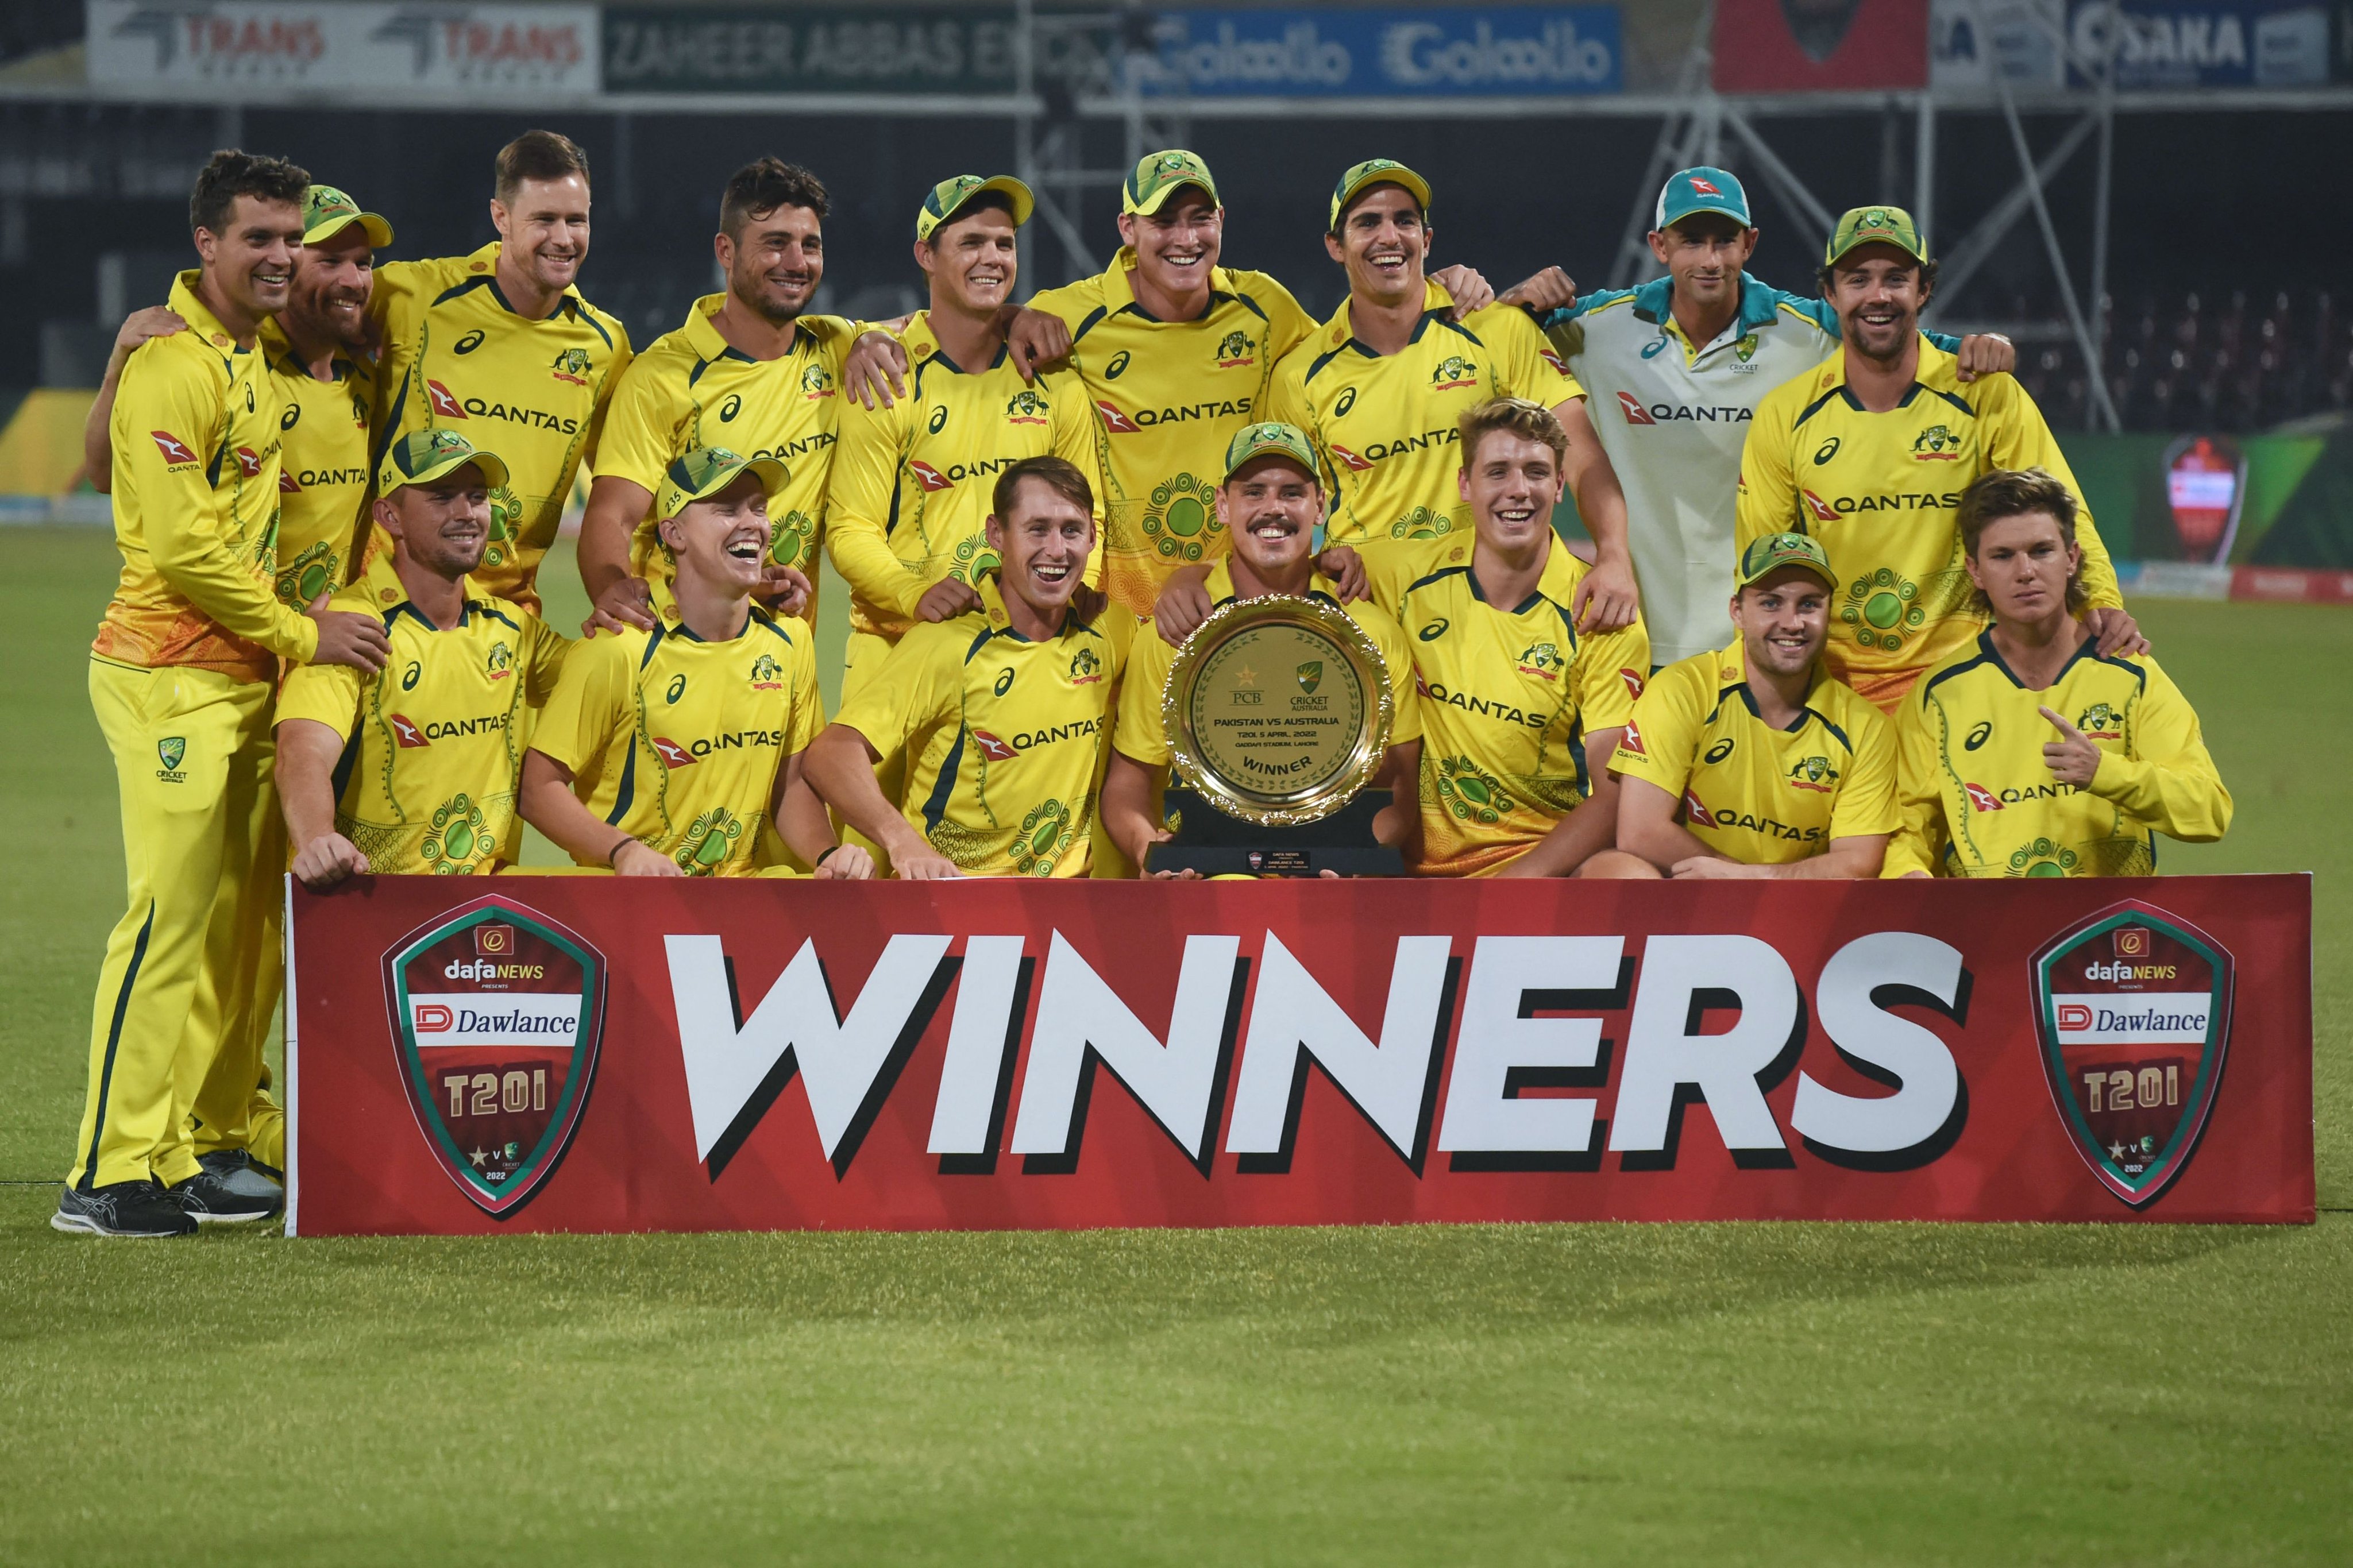 Australia poses with the T20I trophy | CA Twitter